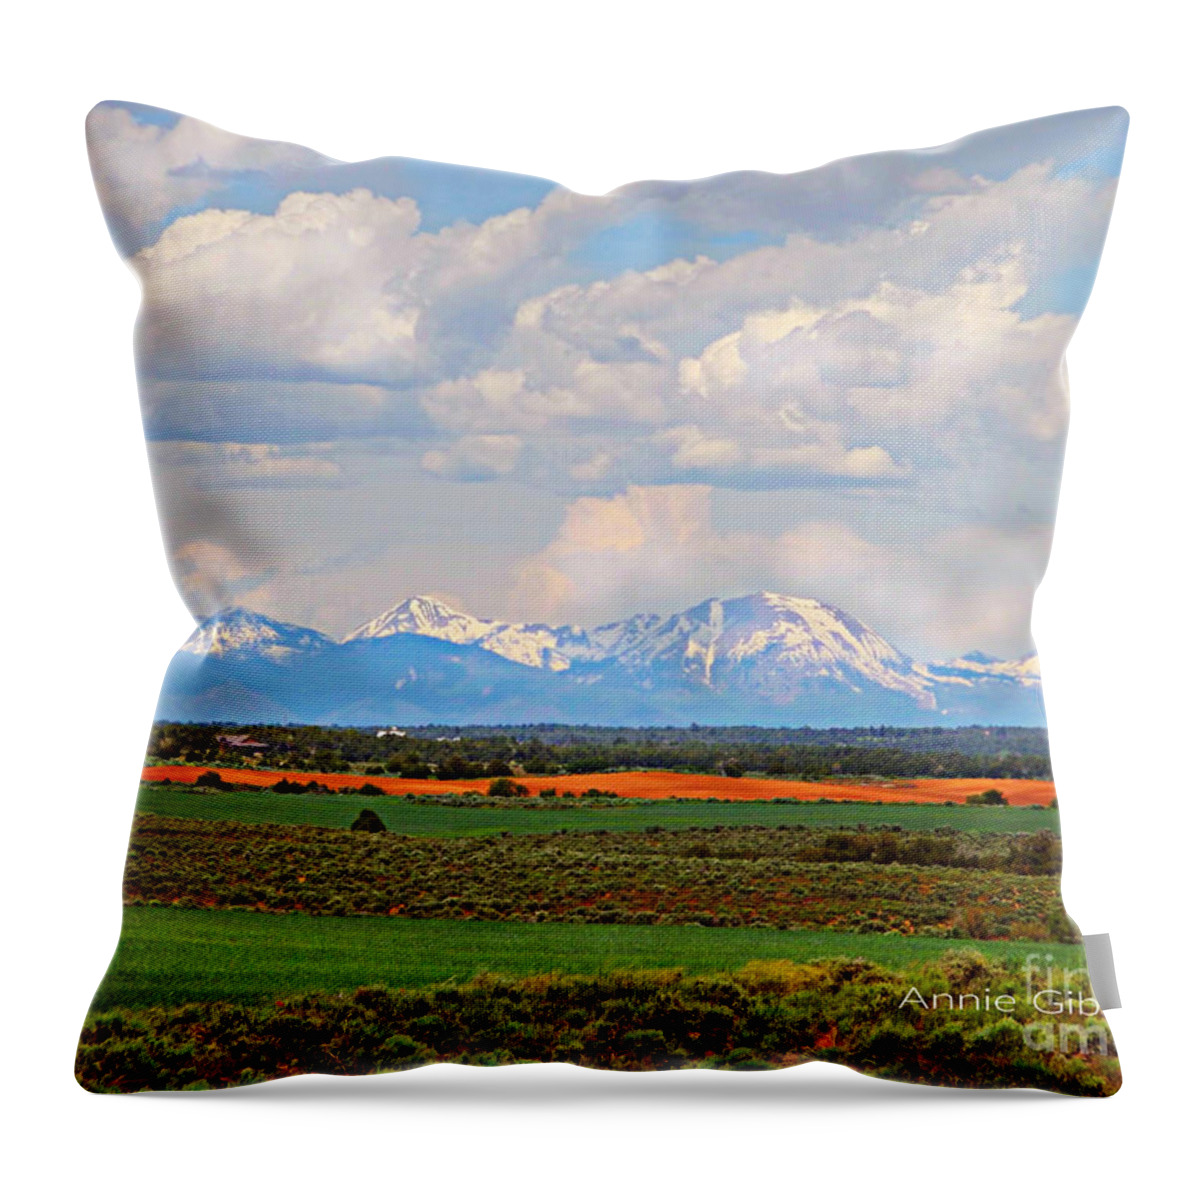 The La Sals Seen From The Dover Creek Area ...spring Time There Is Still Snow On The Mountains ! Throw Pillow featuring the digital art The La Sals seen from the Dove Creek area by Annie Gibbons